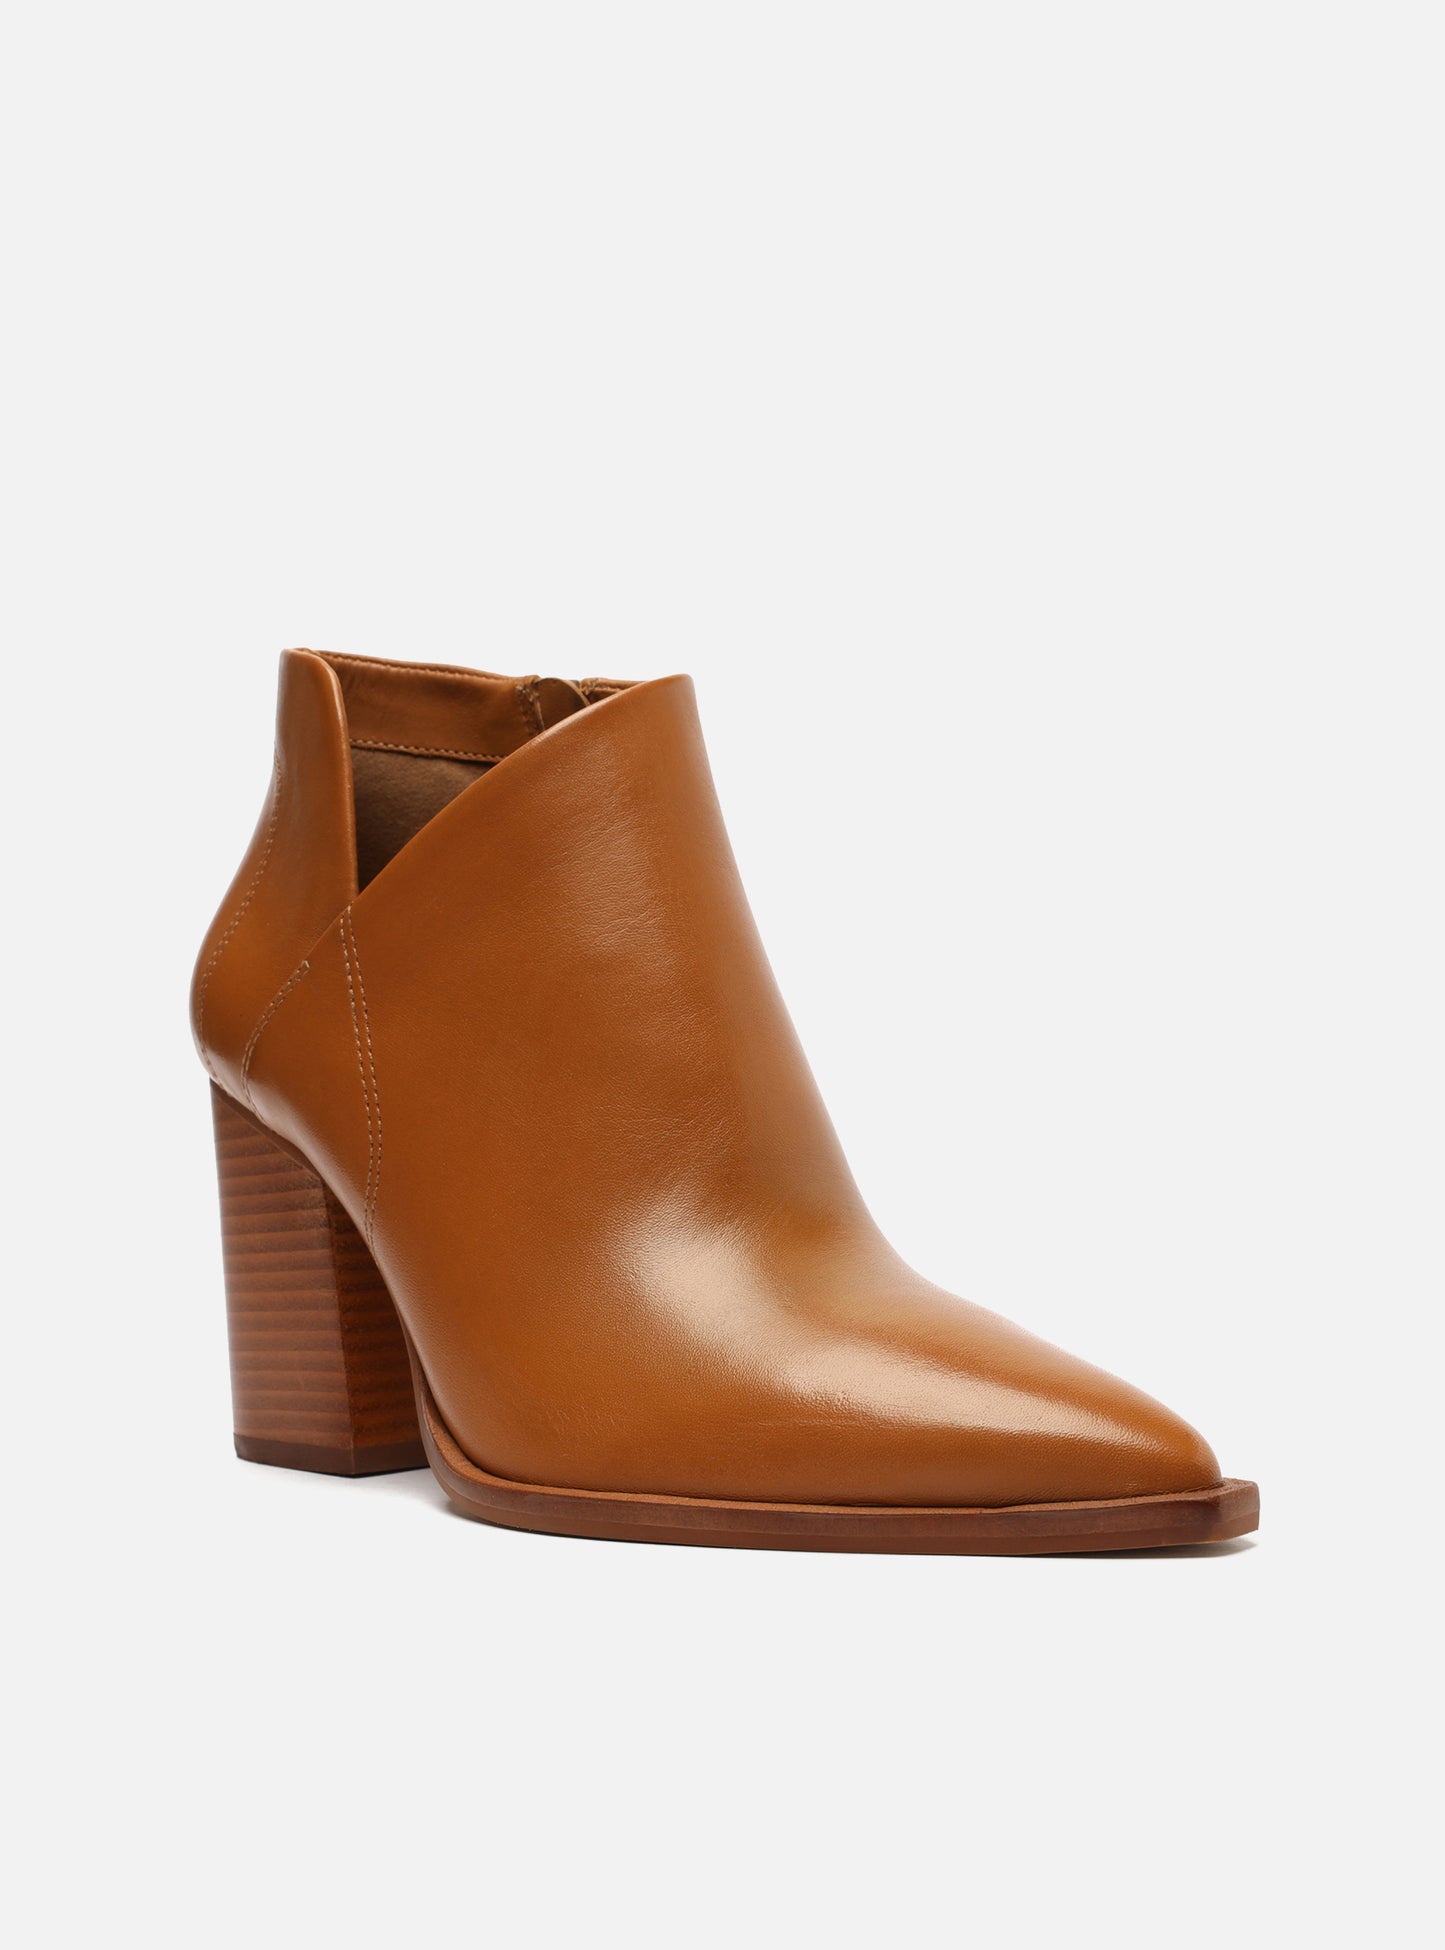 Cora Leather Bootie